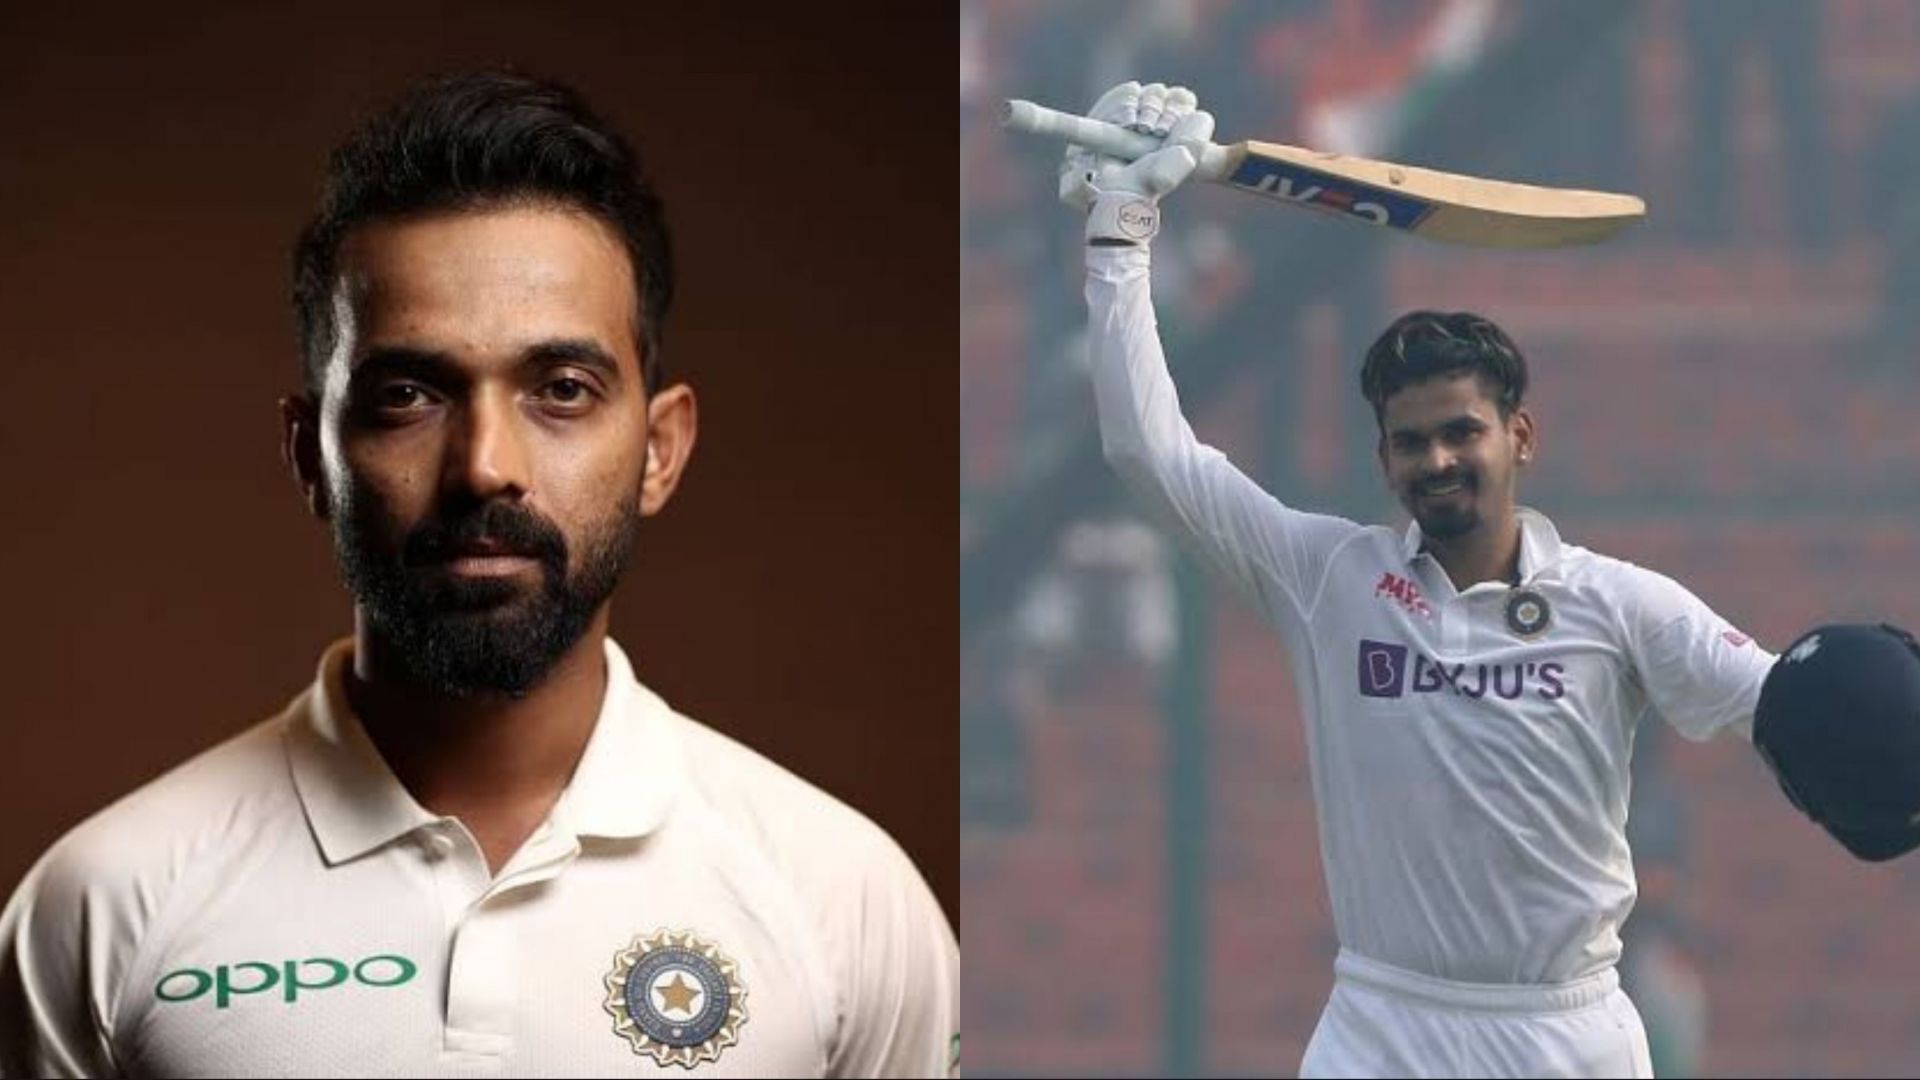 Ajinkya Rahane (L) and Shreyas Iyer will likely compete for a spot in the Indian middle-order for the 1st Test against South Africa